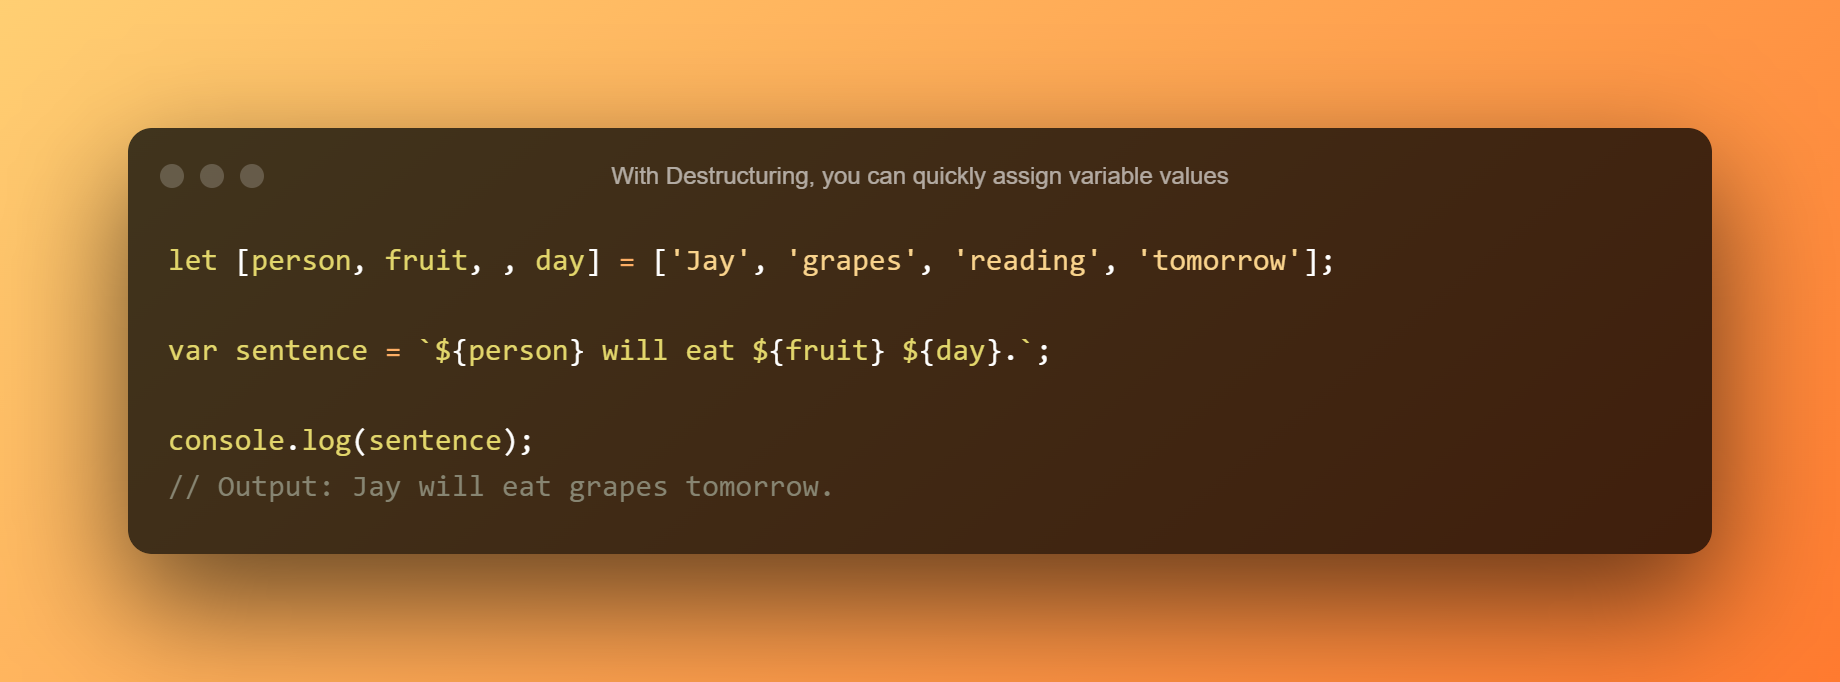 With Destructuring You Can Quickly Assign Variable Values